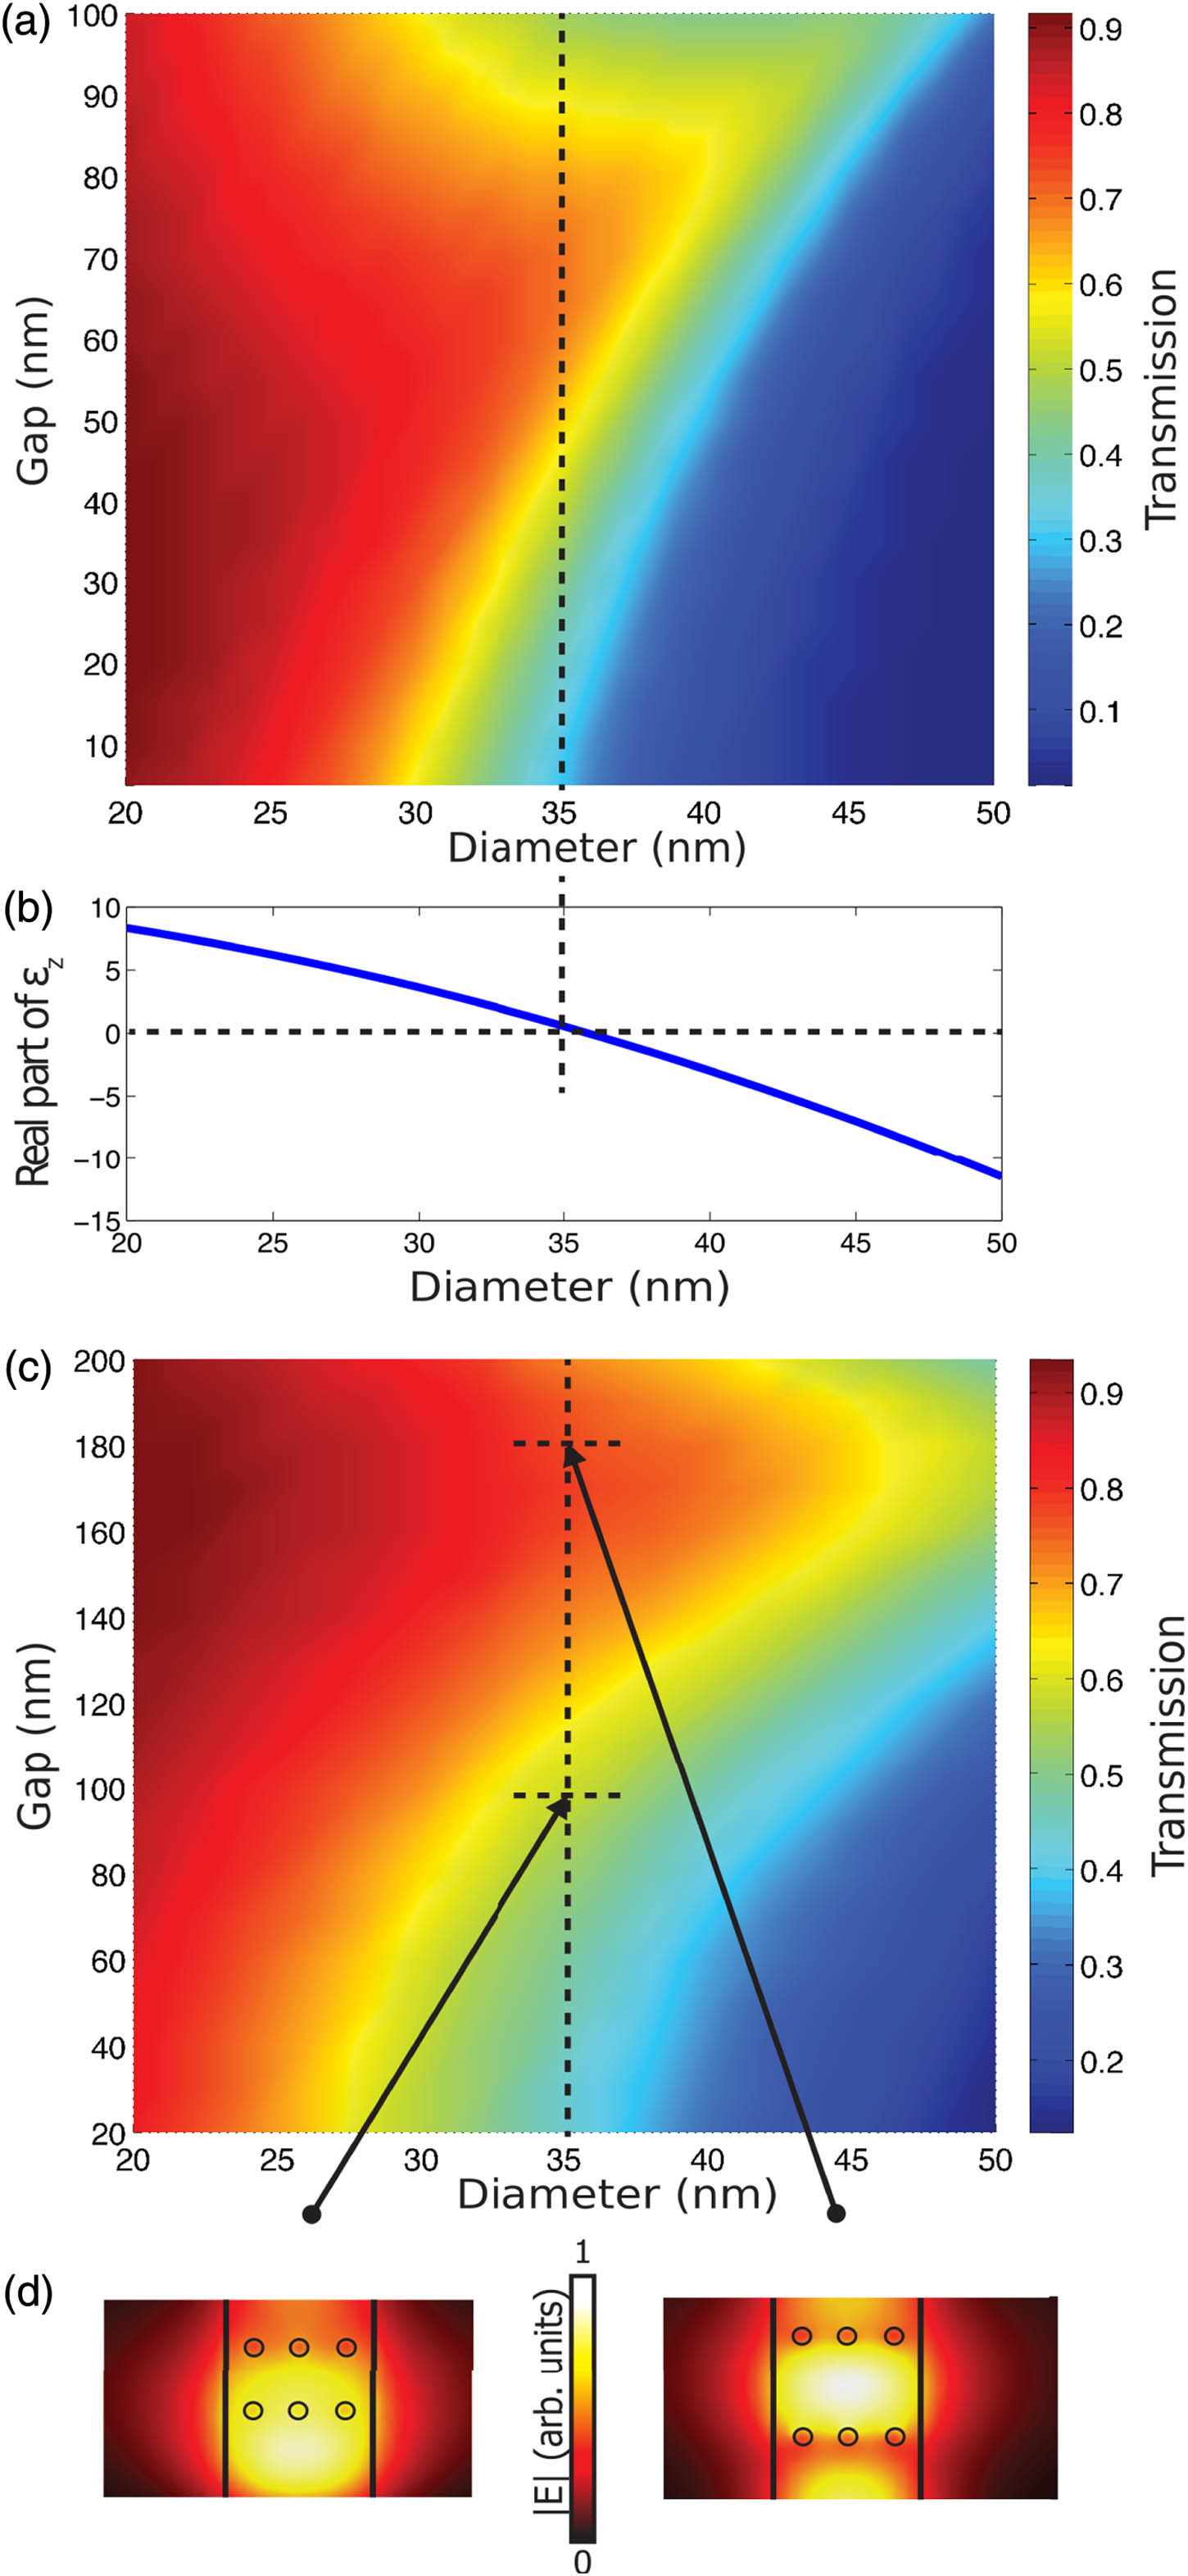 Transmission of the cavity for different nanorod diameters and gaps. (a) TMM calculations. In this geometry, schematically shown in Fig. 1(a), the nanorod metamaterial layers are replaced by homogenenized layers of thickness corresponding to one unit cell of the nanostructured metamaterial. (b) Dependence of the effective permittivity of the metamaterial layer on the nanorod diameter. (c) Full-vectorial 3D simulation of the transmission of the waveguide-integrated modulator for different nanorod diameters and gaps. (d) Intensity distribution of the guided mode for (left) low- and (right) high-transmission states occuring for the gaps of ∼100 nm and ∼180 nm, respectively. The nanorod diameter was set to 35 nm with the distance between nanorods being 90 nm; the waveguide cross-sectional dimension is 340 nm×300 nm. All simulations were performed at a wavelength of 1.55 μm.